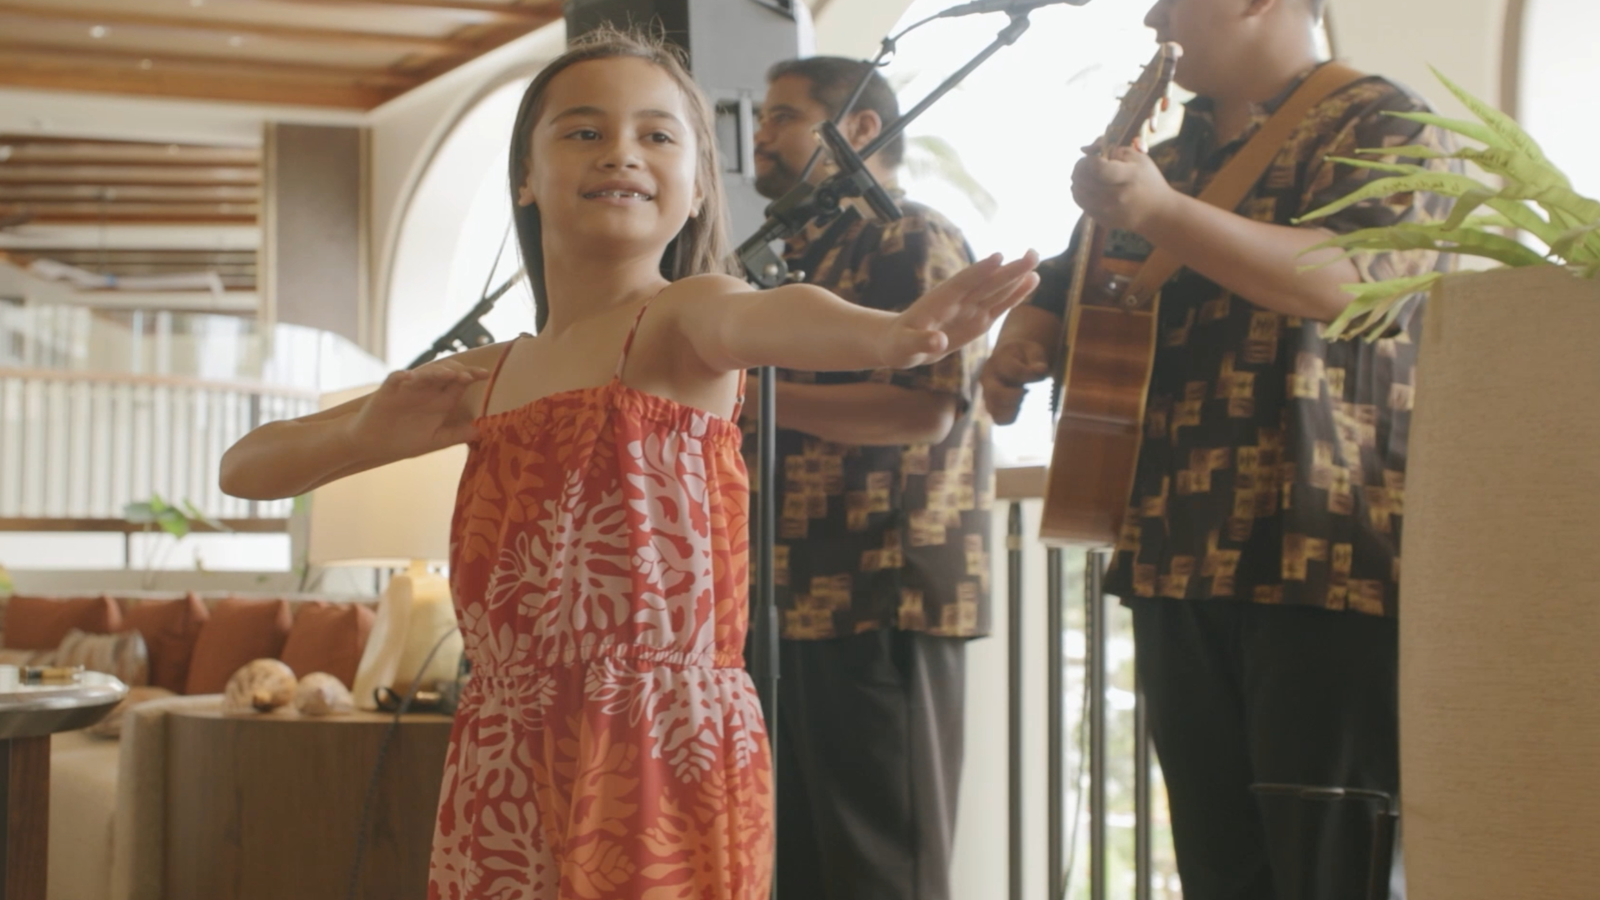 Maui’s Fairmont Kea Lani Resort immerses guests in Hawaiian tradition through new cultural center [Video]